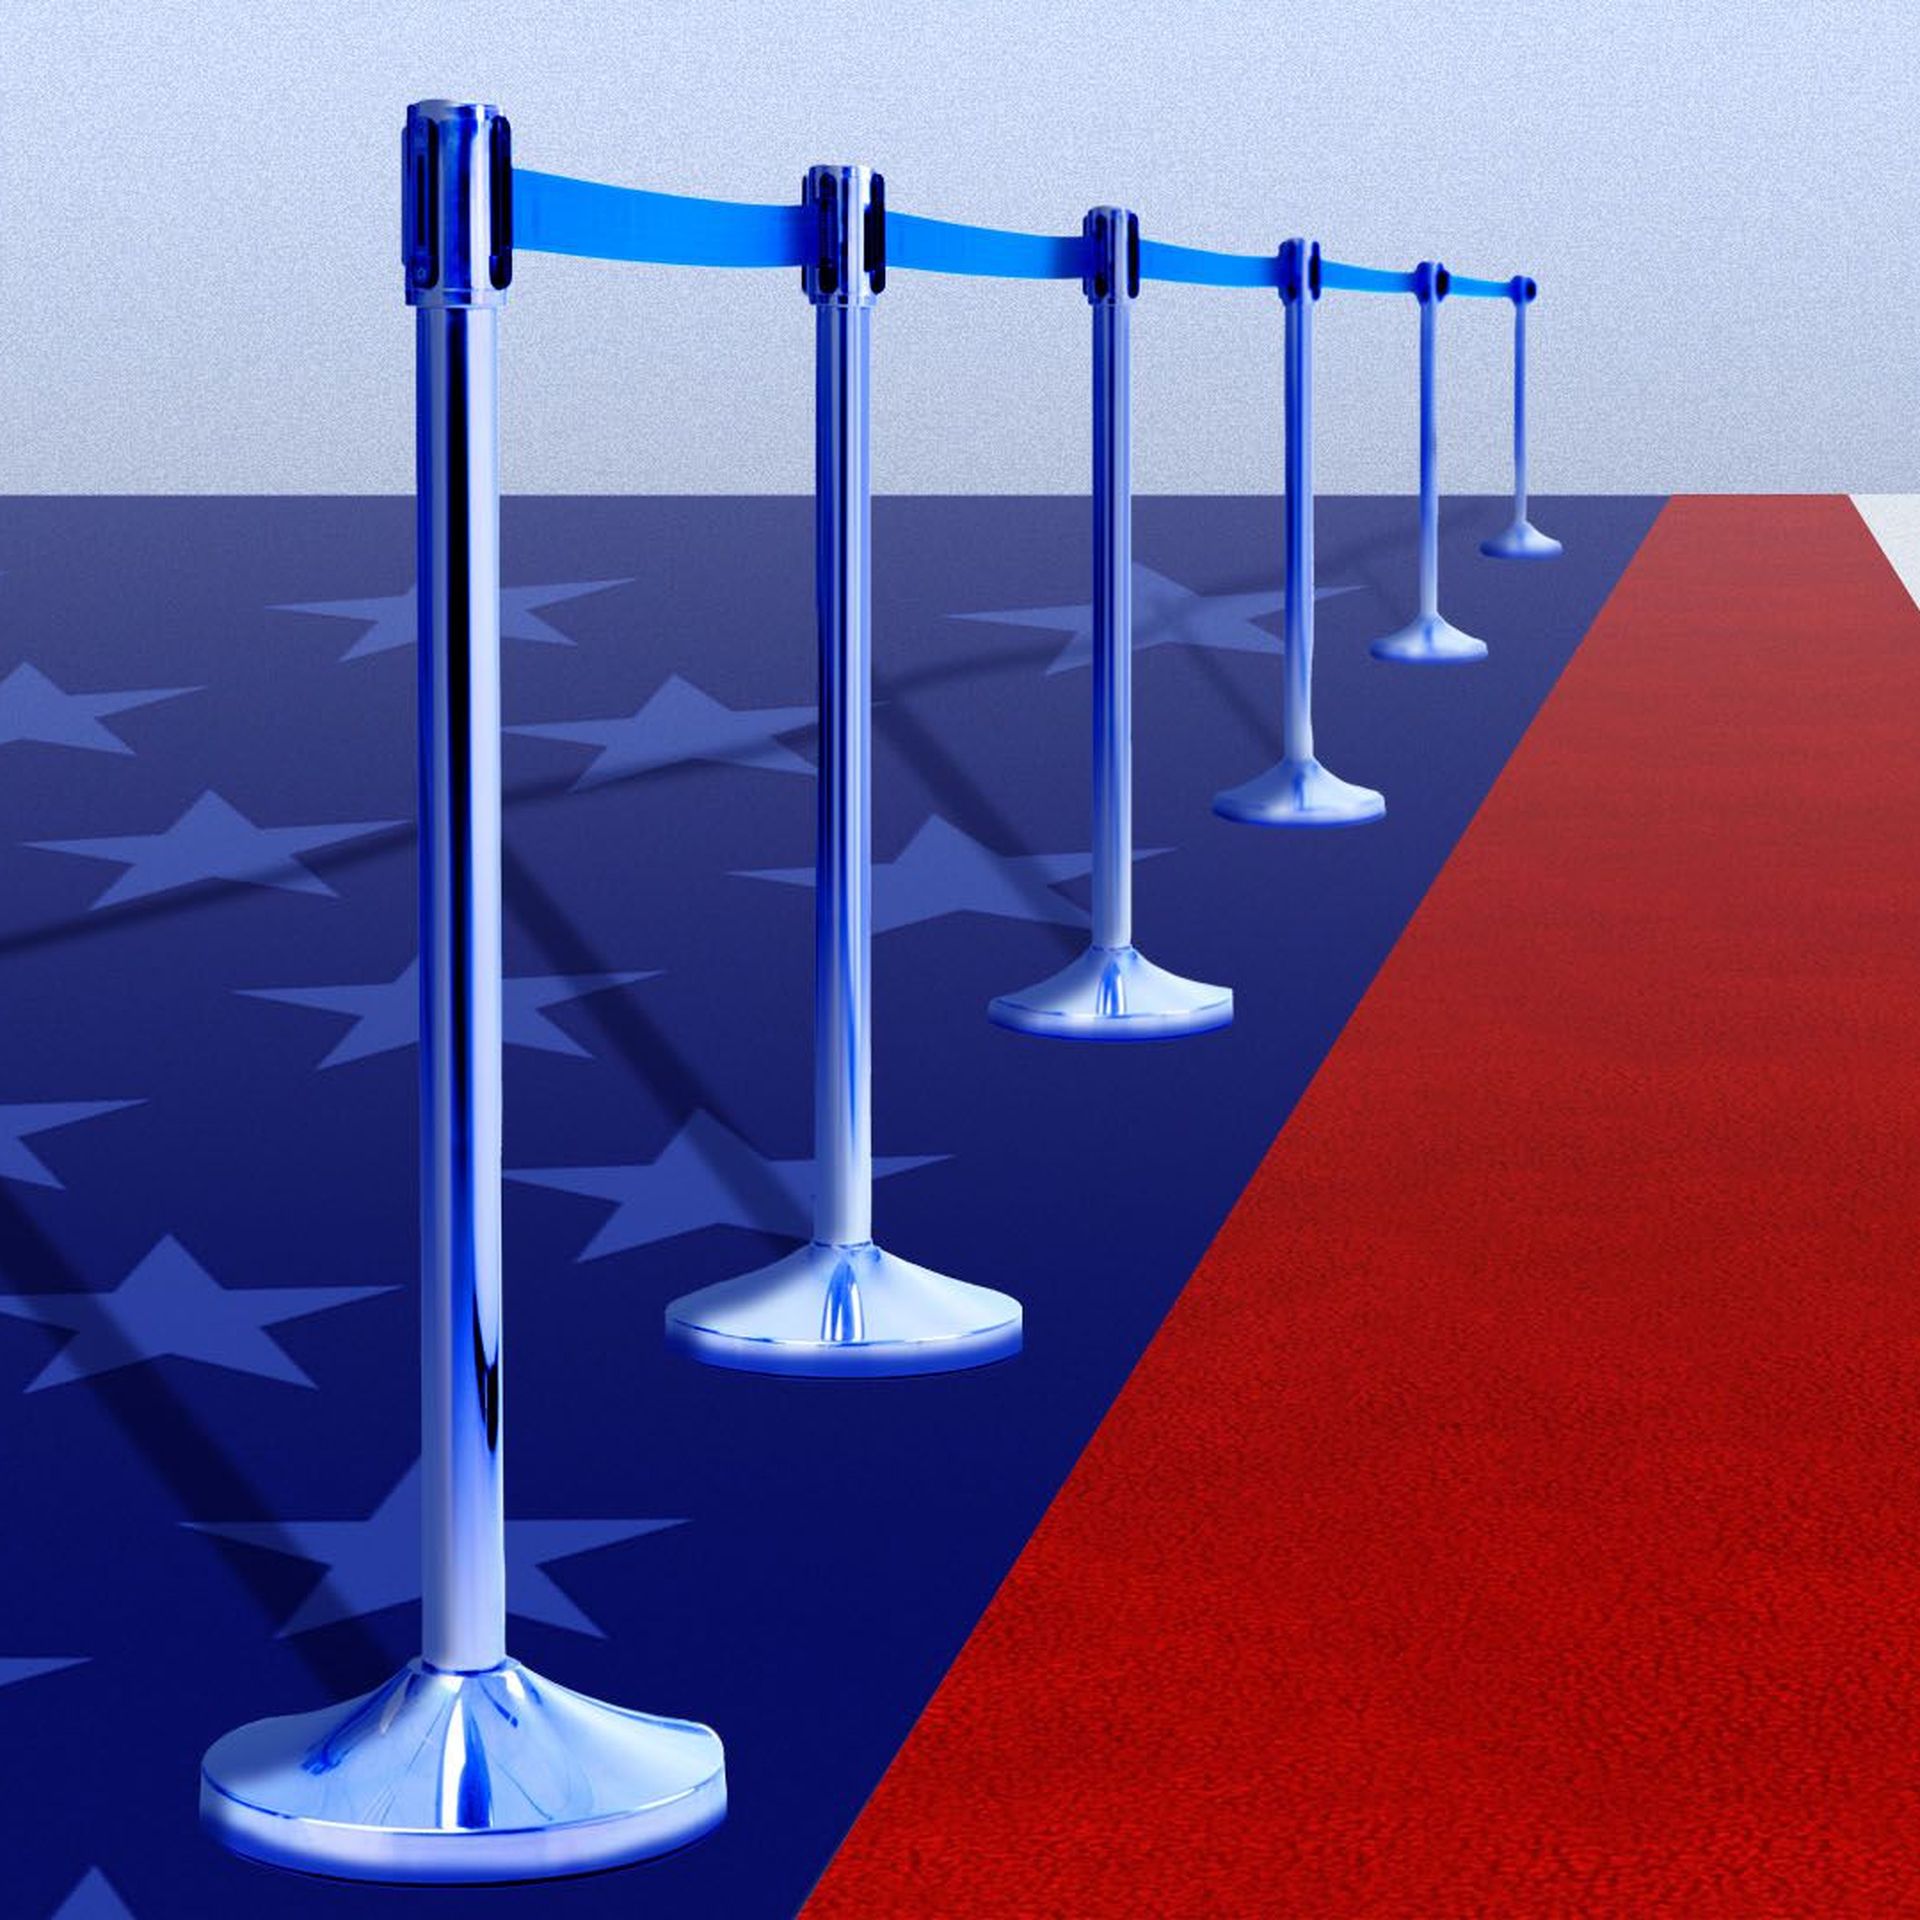 Illustration of the American flag with a stripe as a red carpet with a portable rope barrier beside it